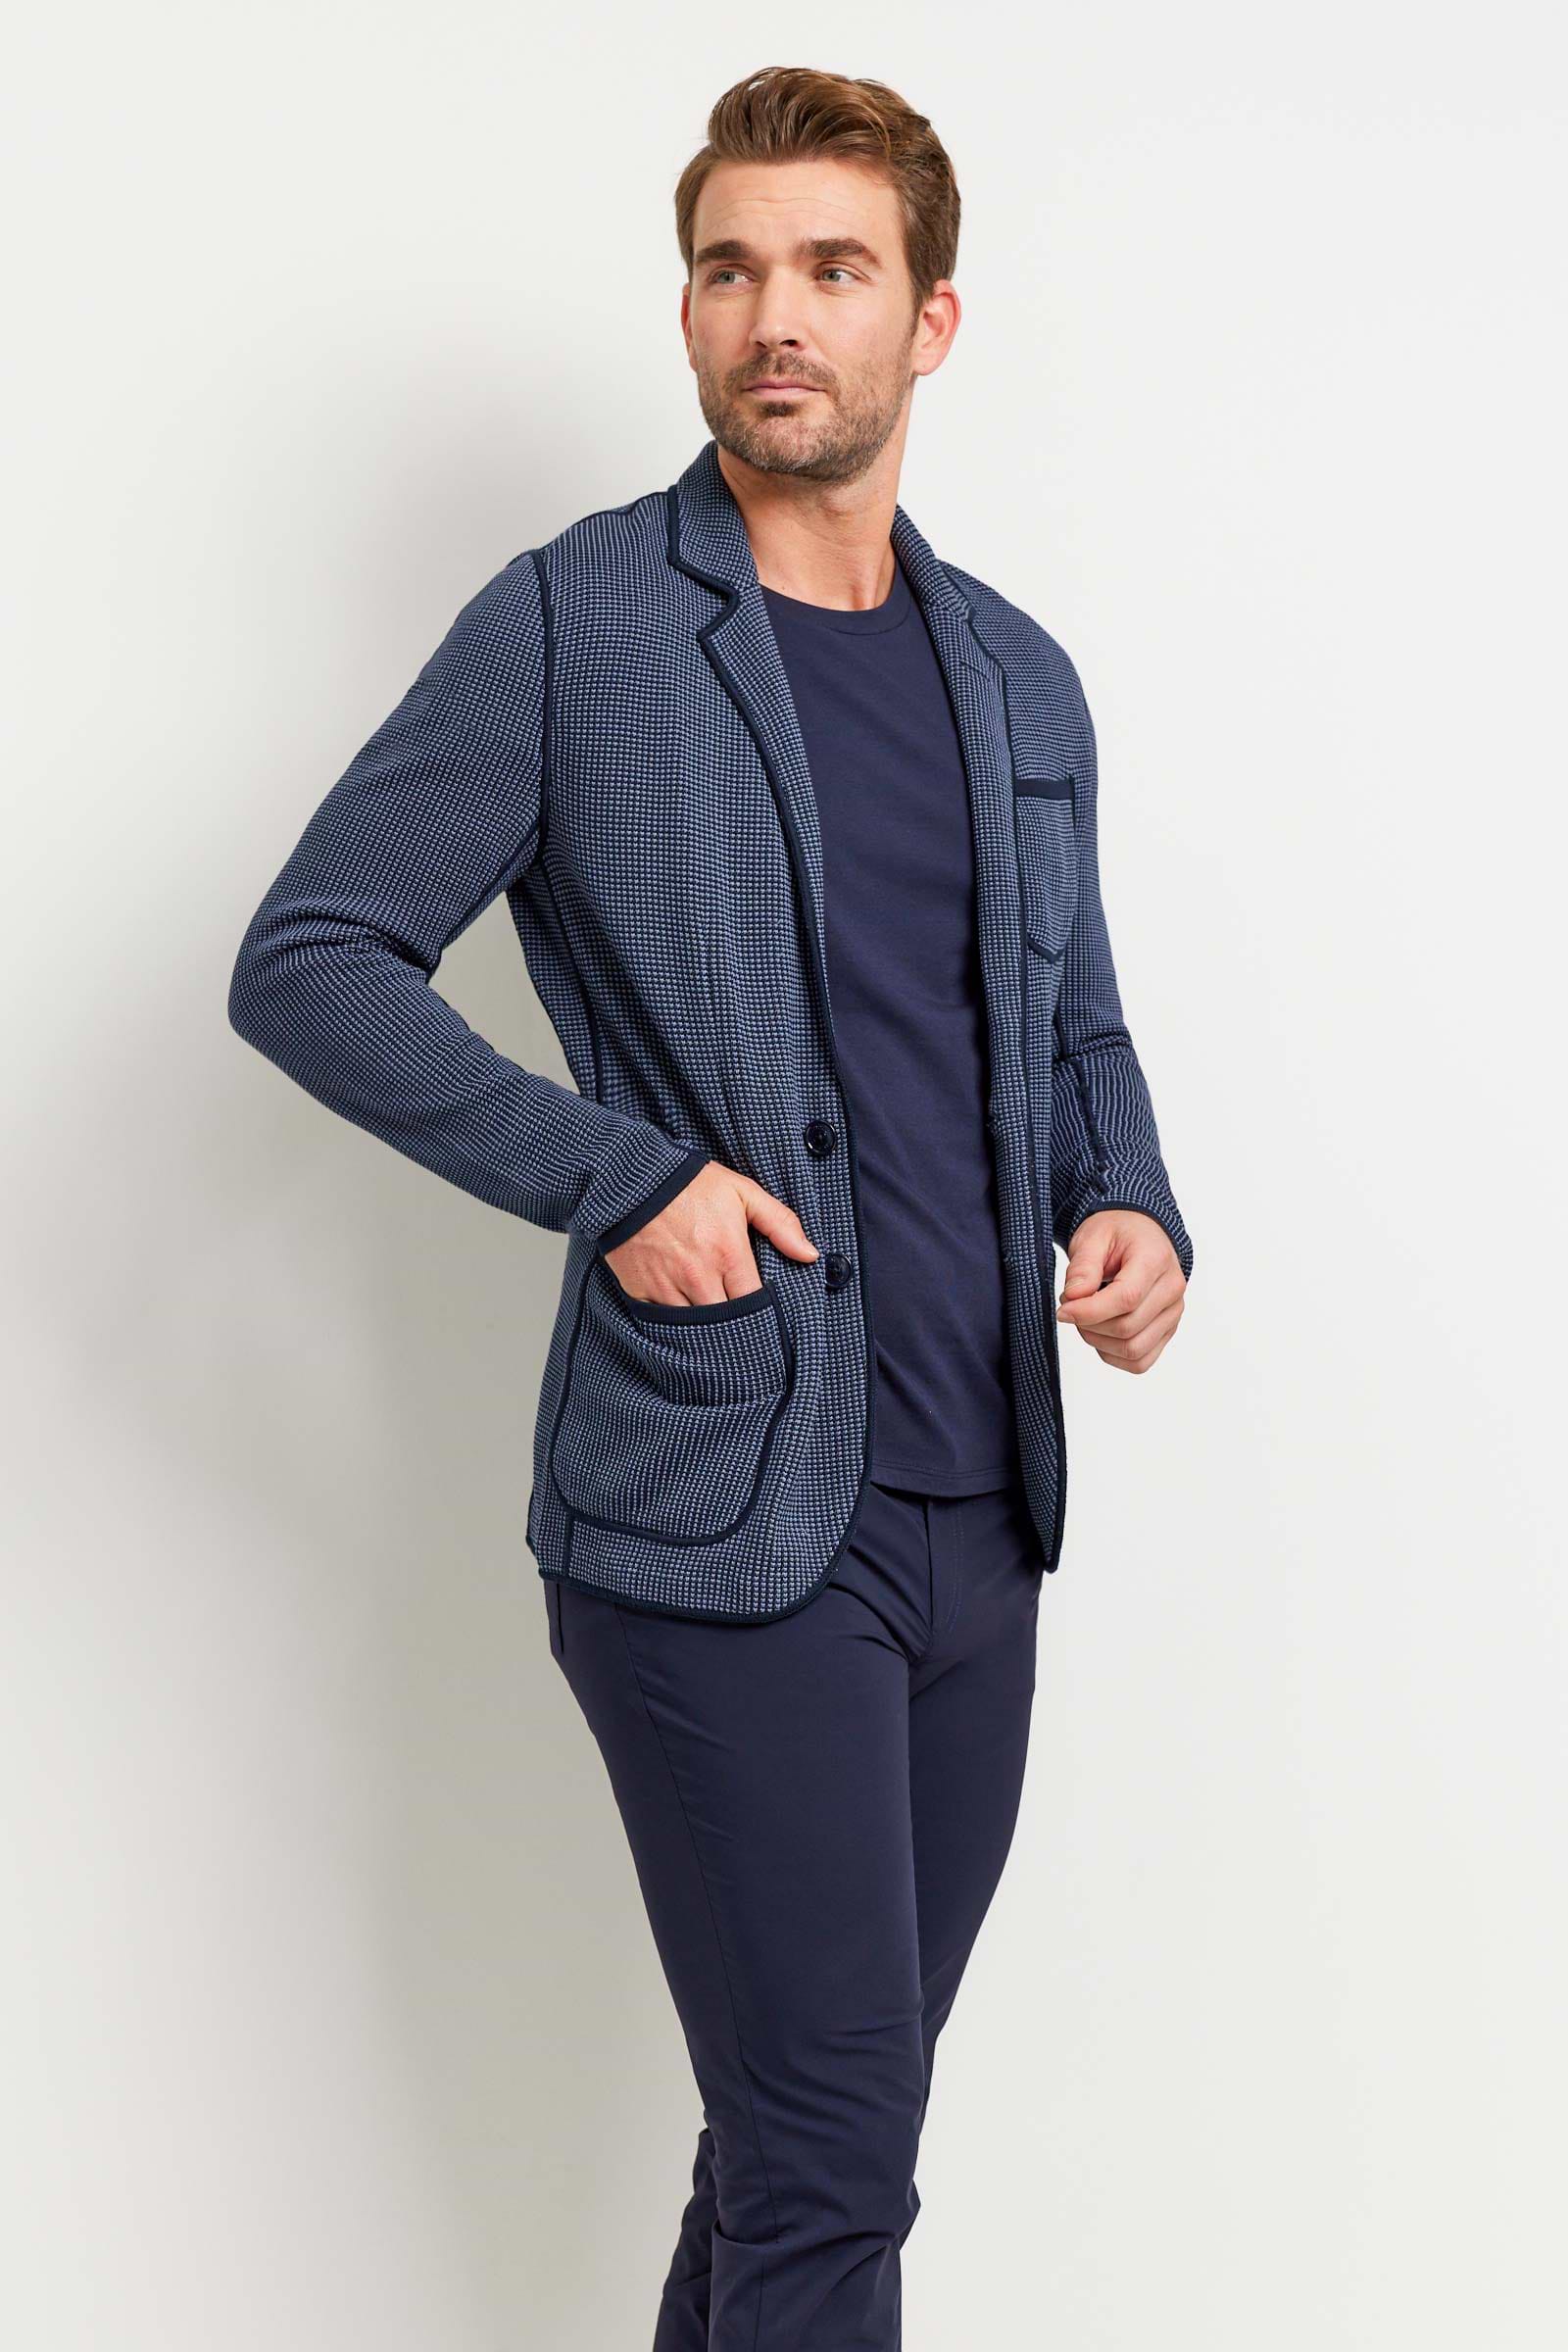 The Best Travel Jacket. Man Showing the Side Profile of a Men's Duncan Jacket in 2 Tone Blue.